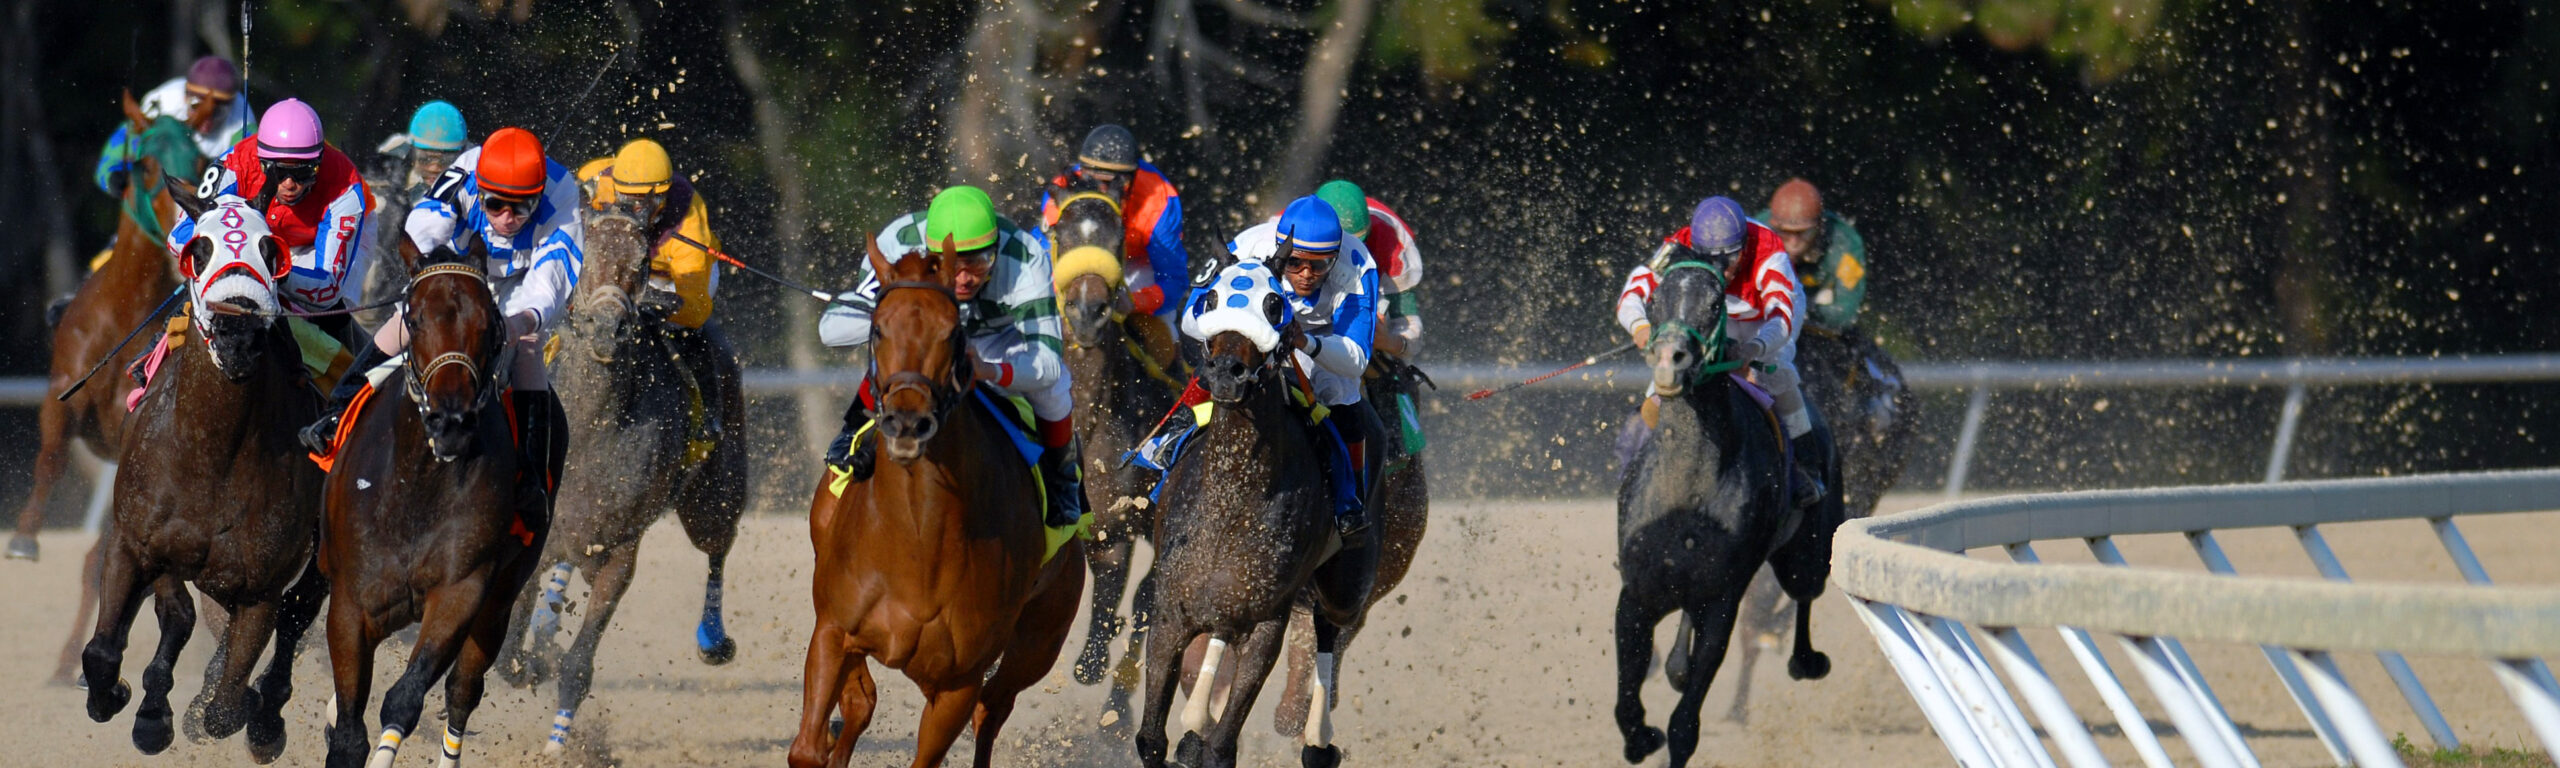 Horses racing on a track.